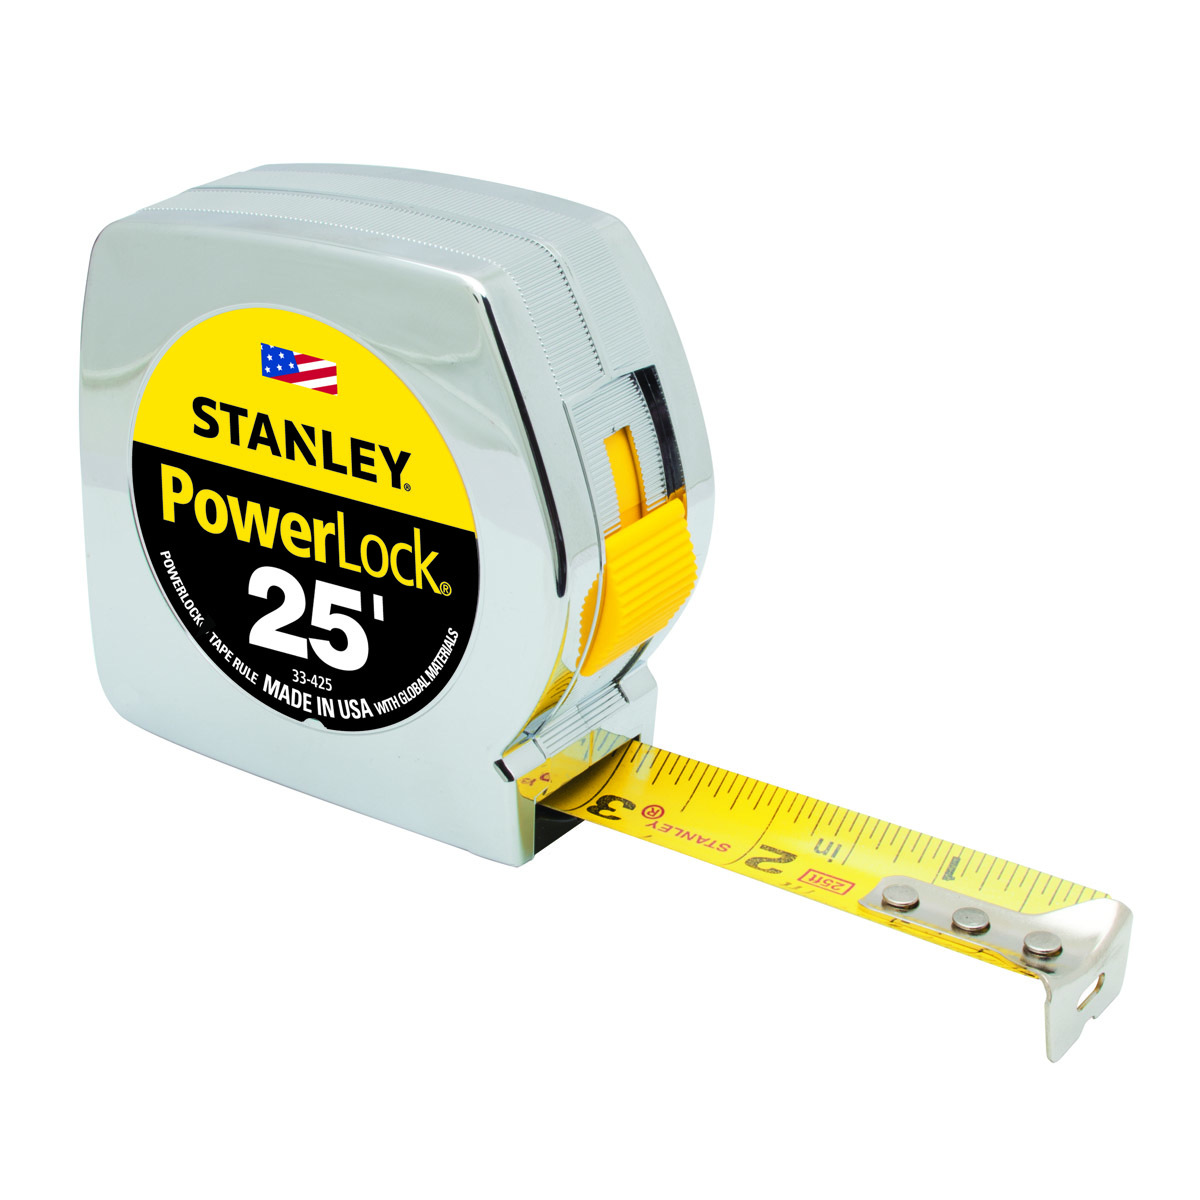 Airgas Corrosion-Resistant Stanley® X PowerLock® Measure - Tape 25\' With End S2933-425 Chrome 1\